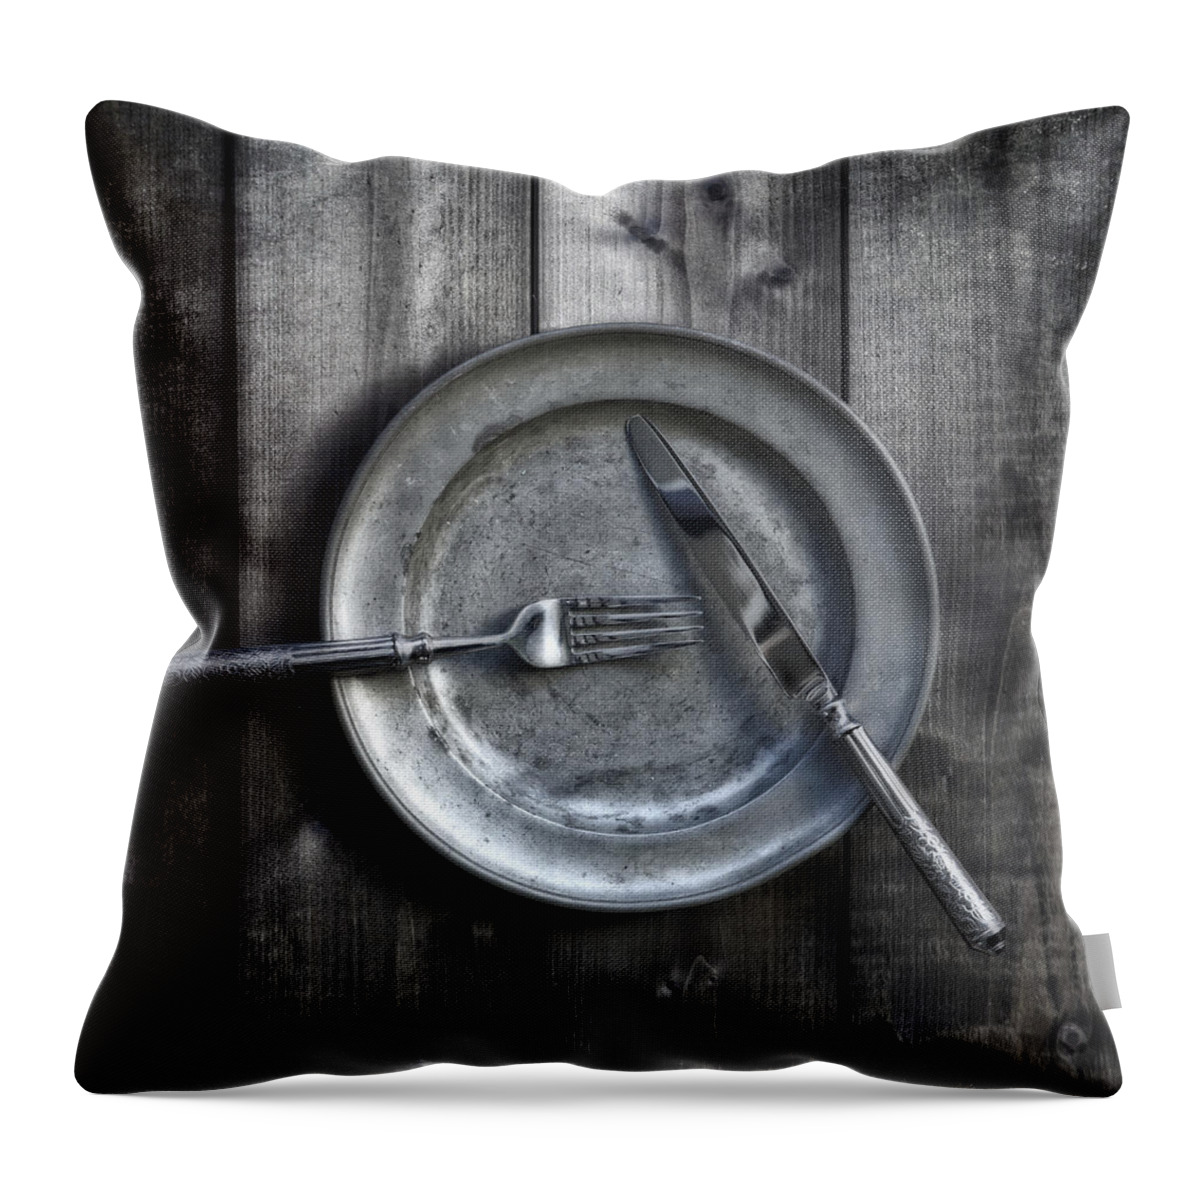 Silver Throw Pillow featuring the photograph Plate With Silverware by Joana Kruse